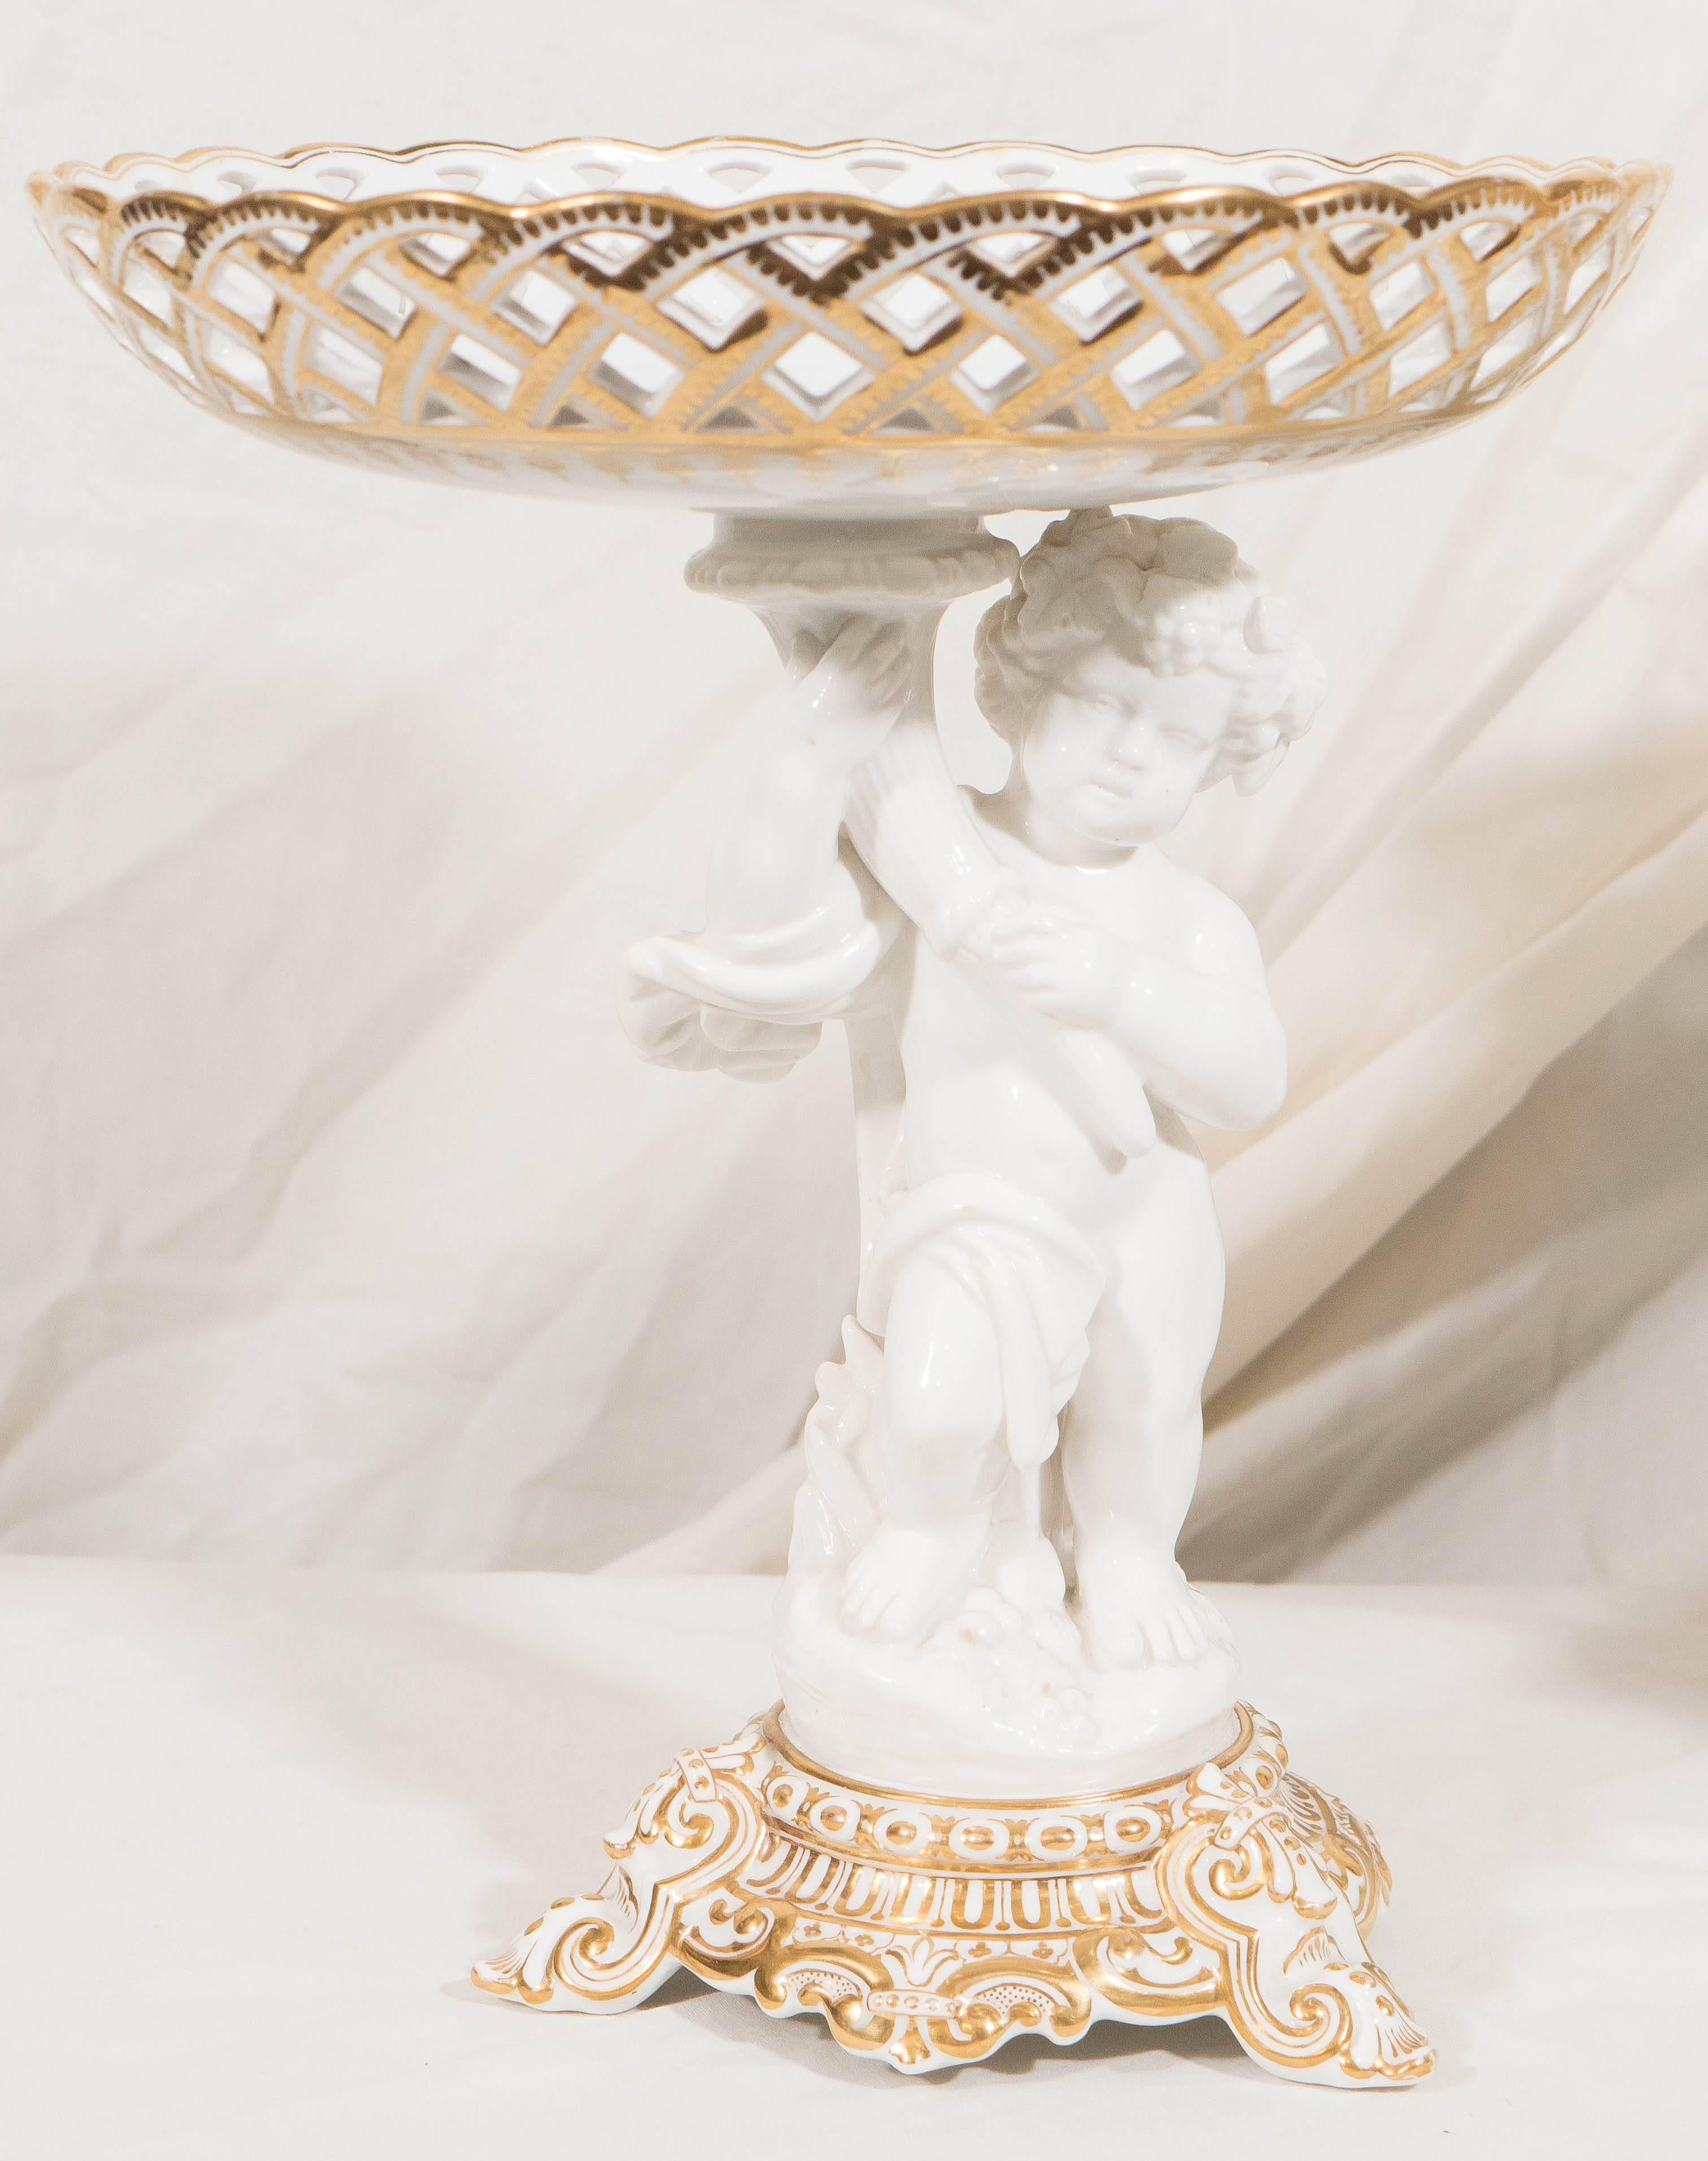 A model of a young boy holding a cornucopia supports the basket. The pierced baskets and the bases of these mid-19th century porcelain pieces were decorated with ornate gilding. Pairs of baskets like these were made to be filled with fruit or